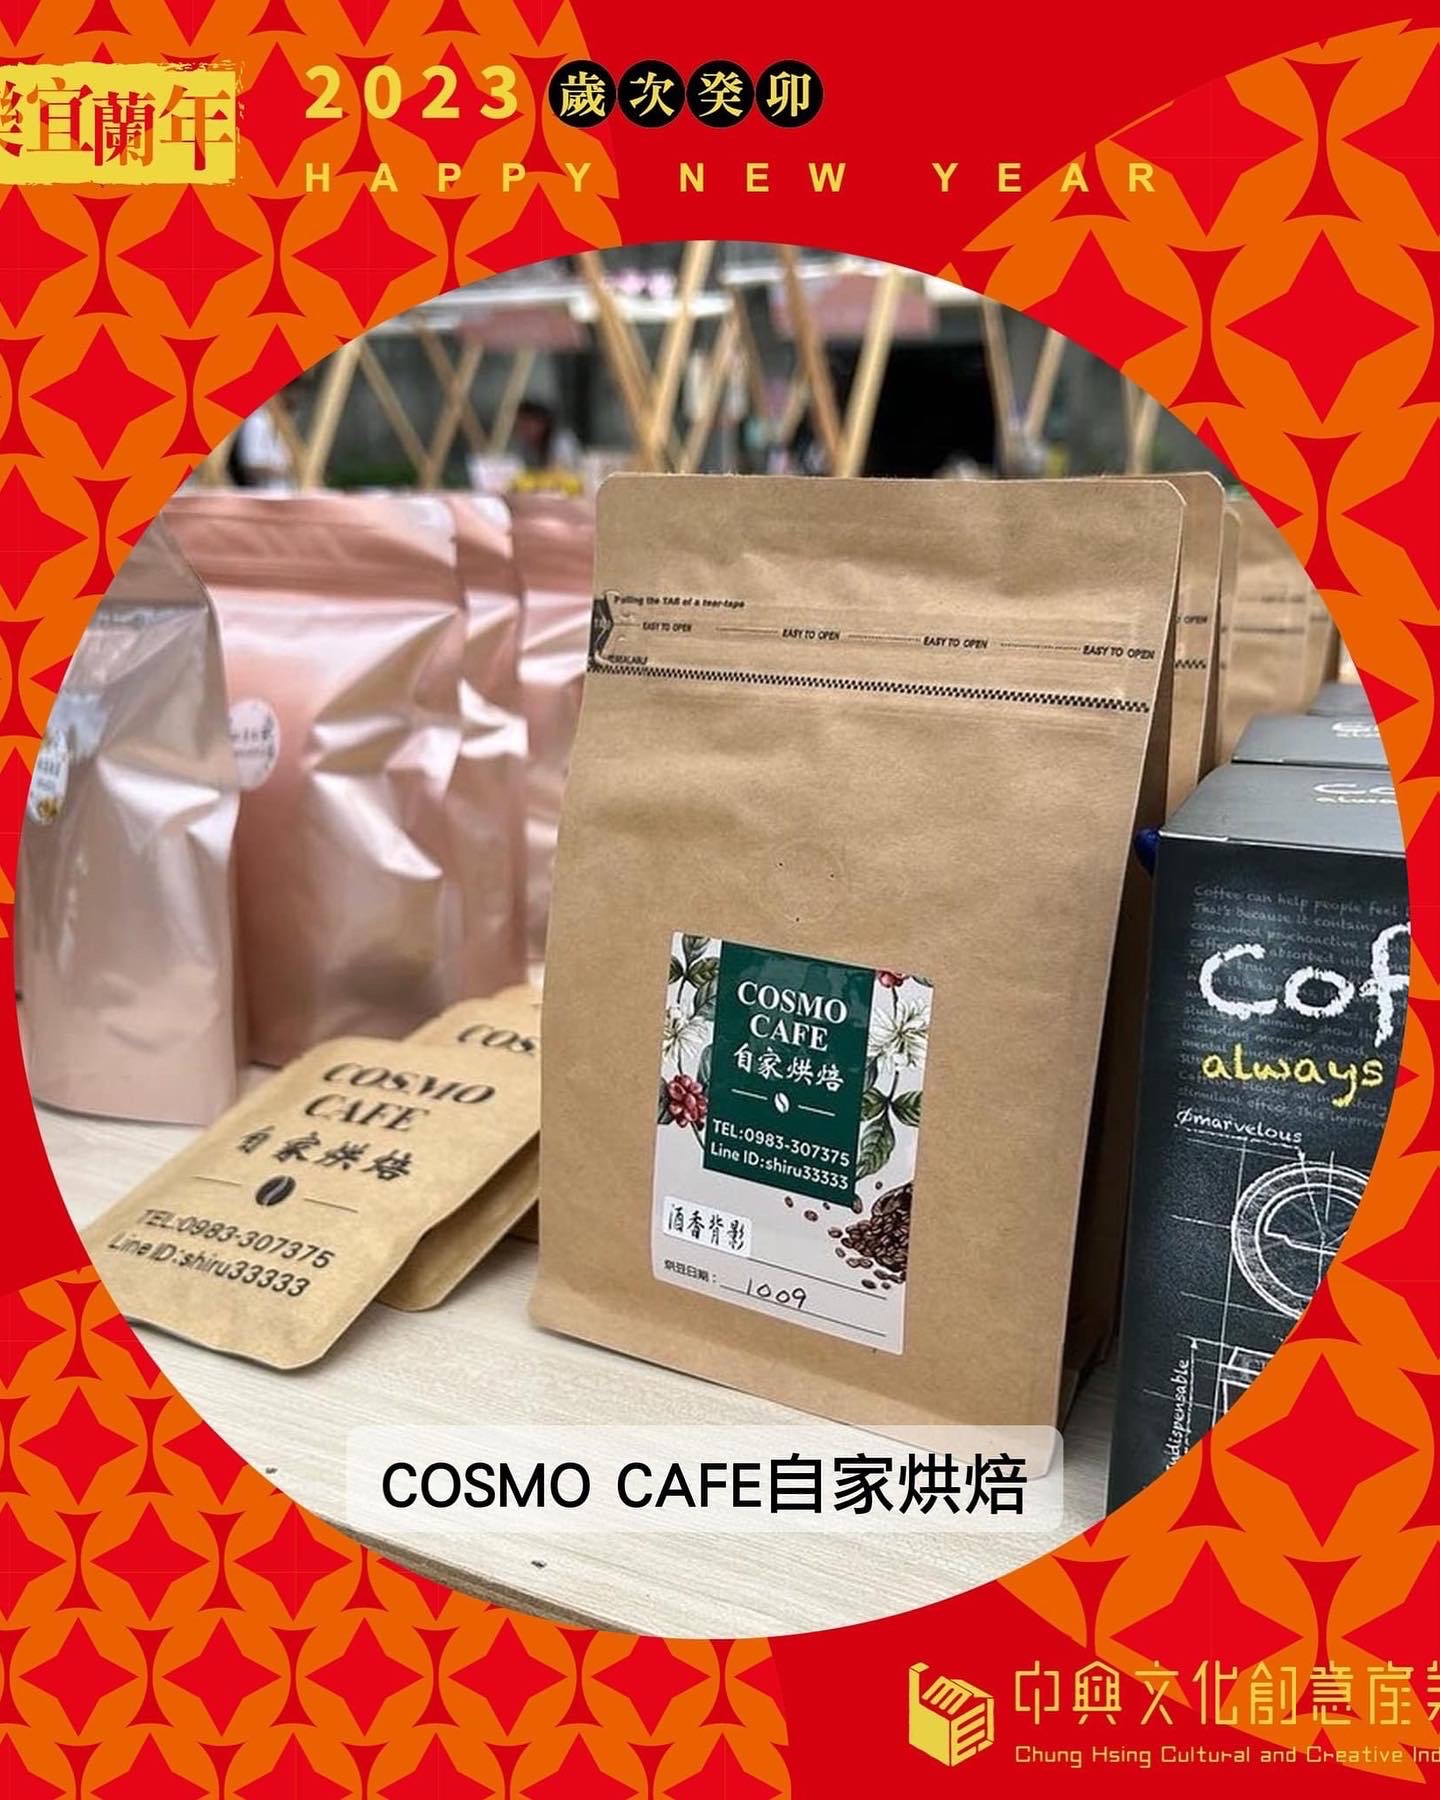 COSMO CAFE 客製化